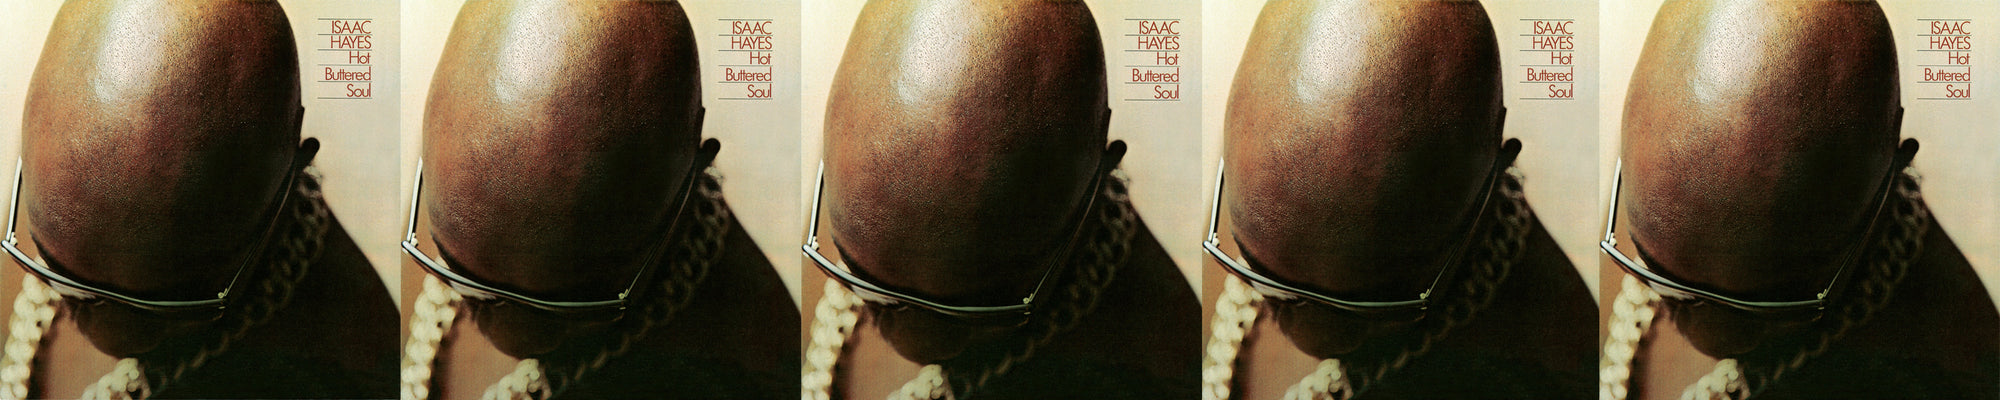 ISAAC HAYES HOT BUTTERED SOUL